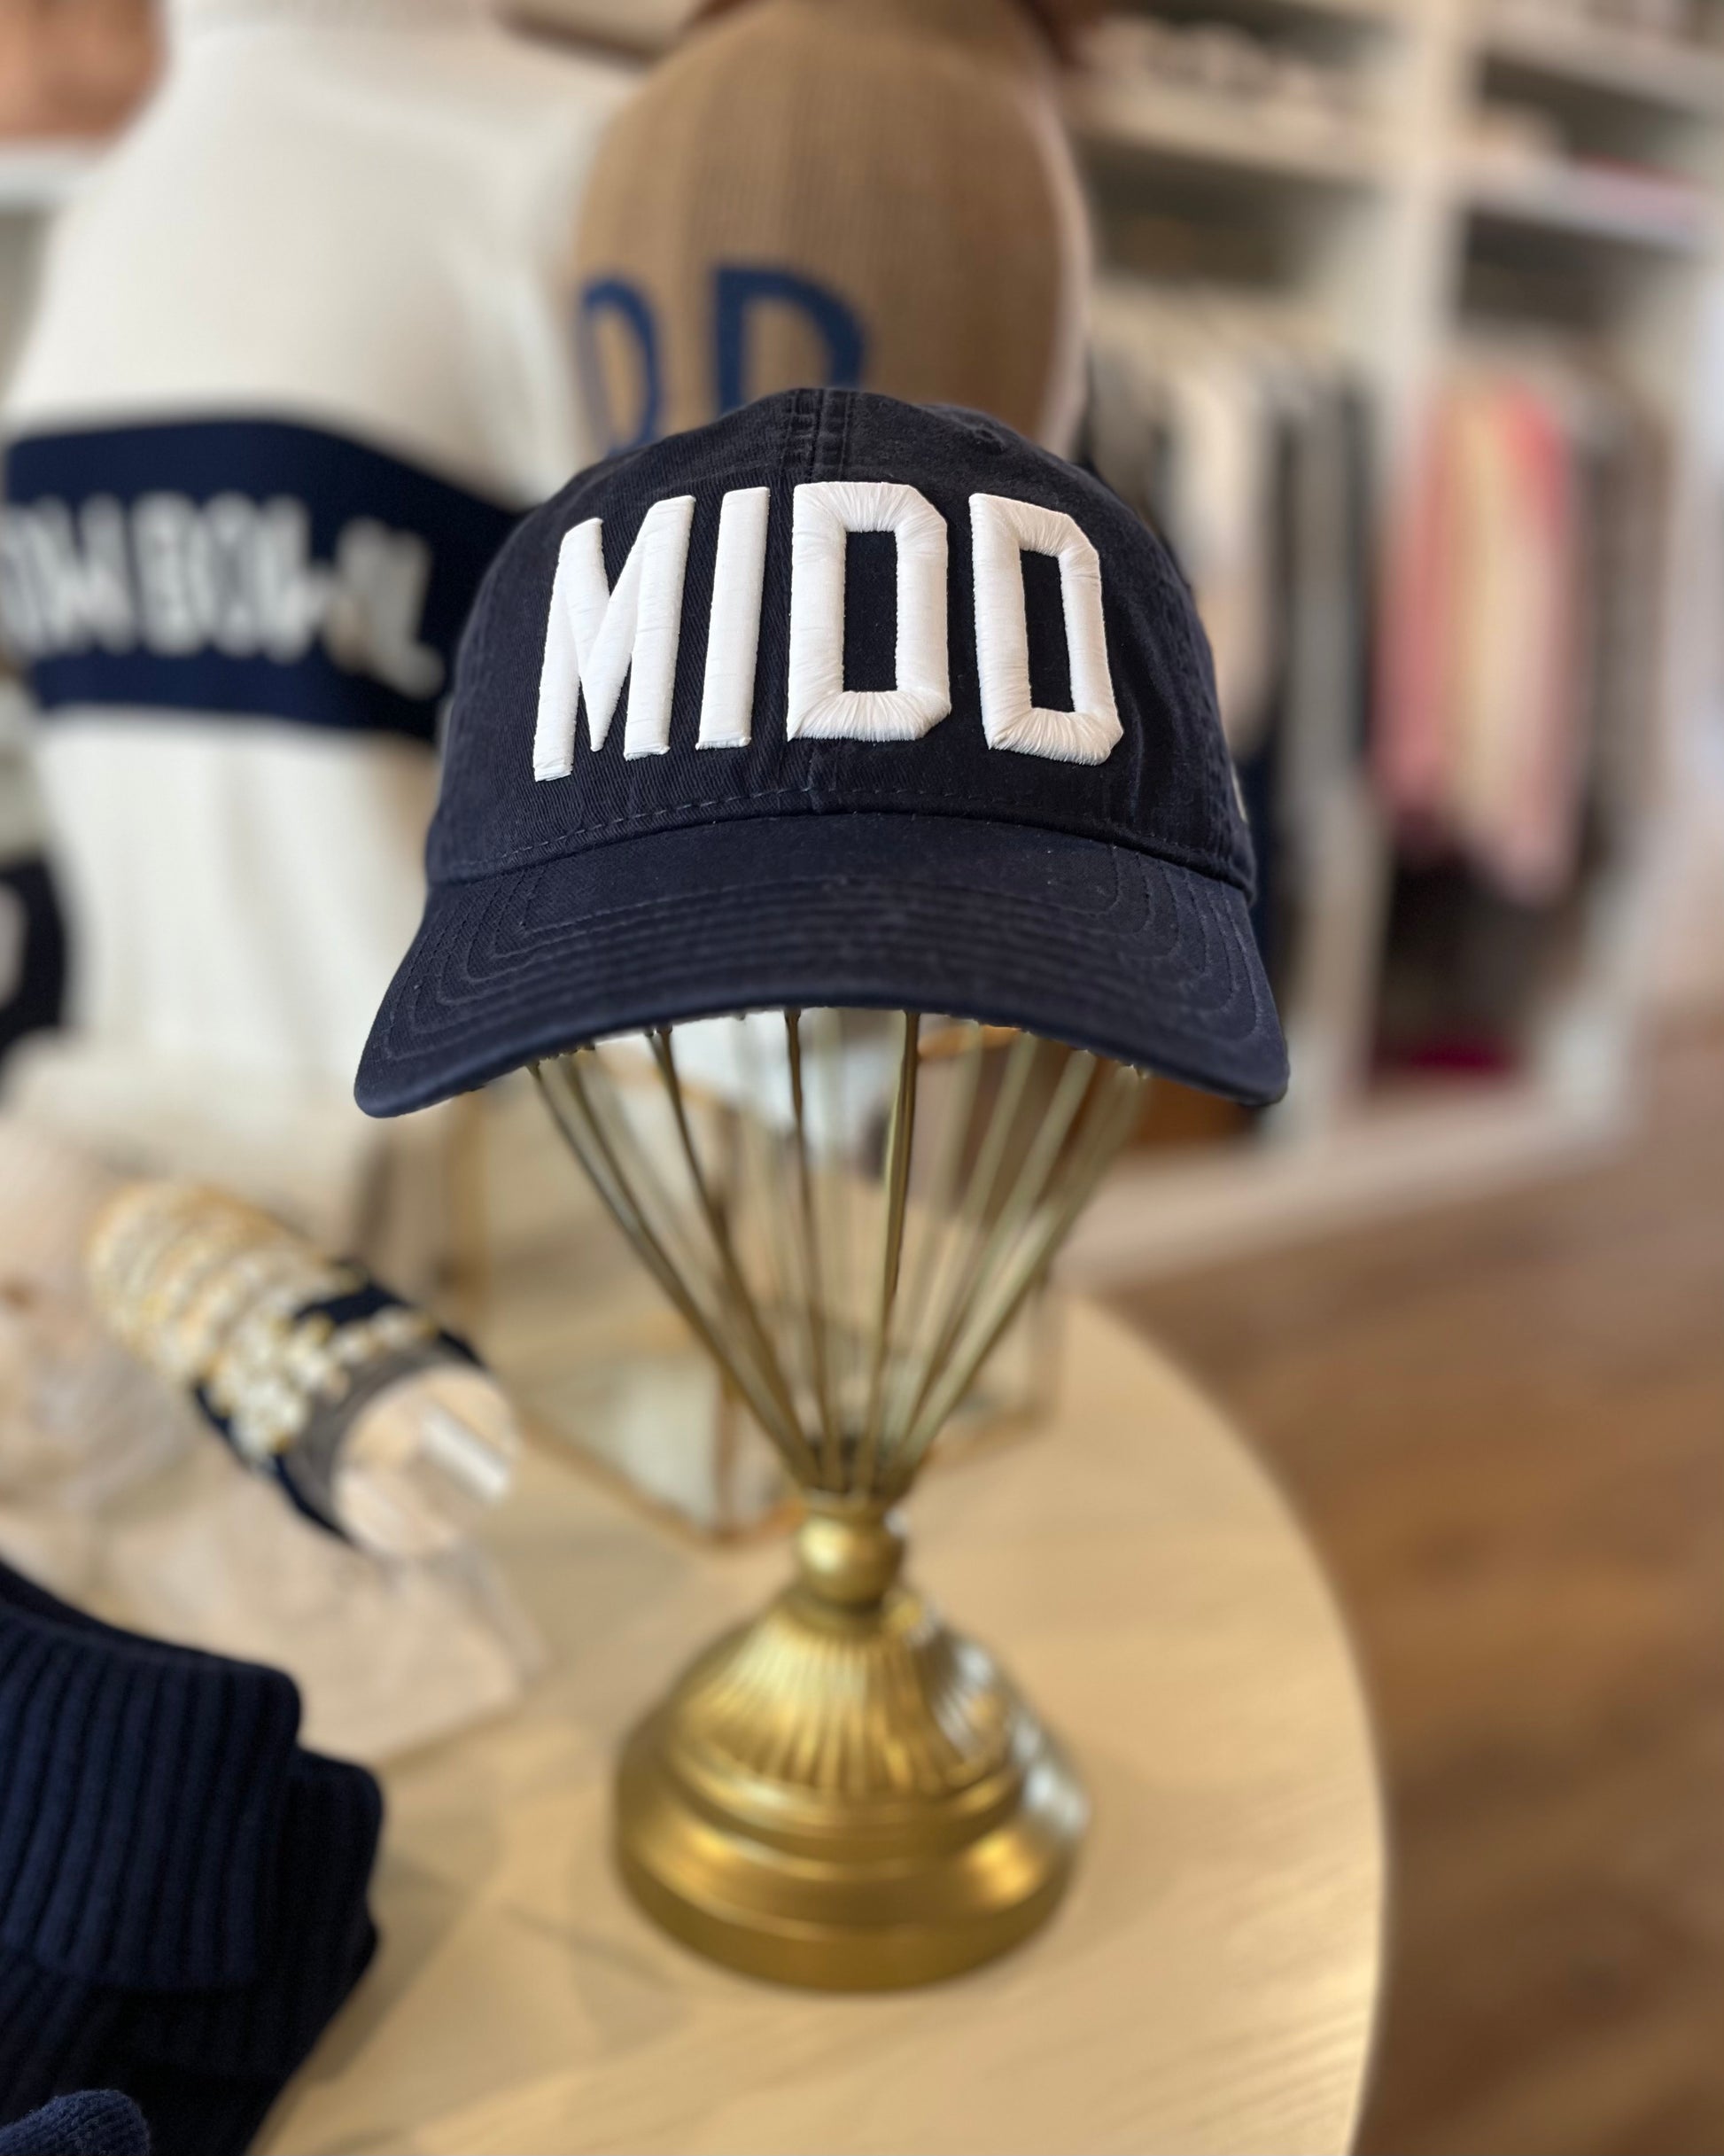 Image of Middlebury College MIDD Navy hat with white stitching sitting on a table